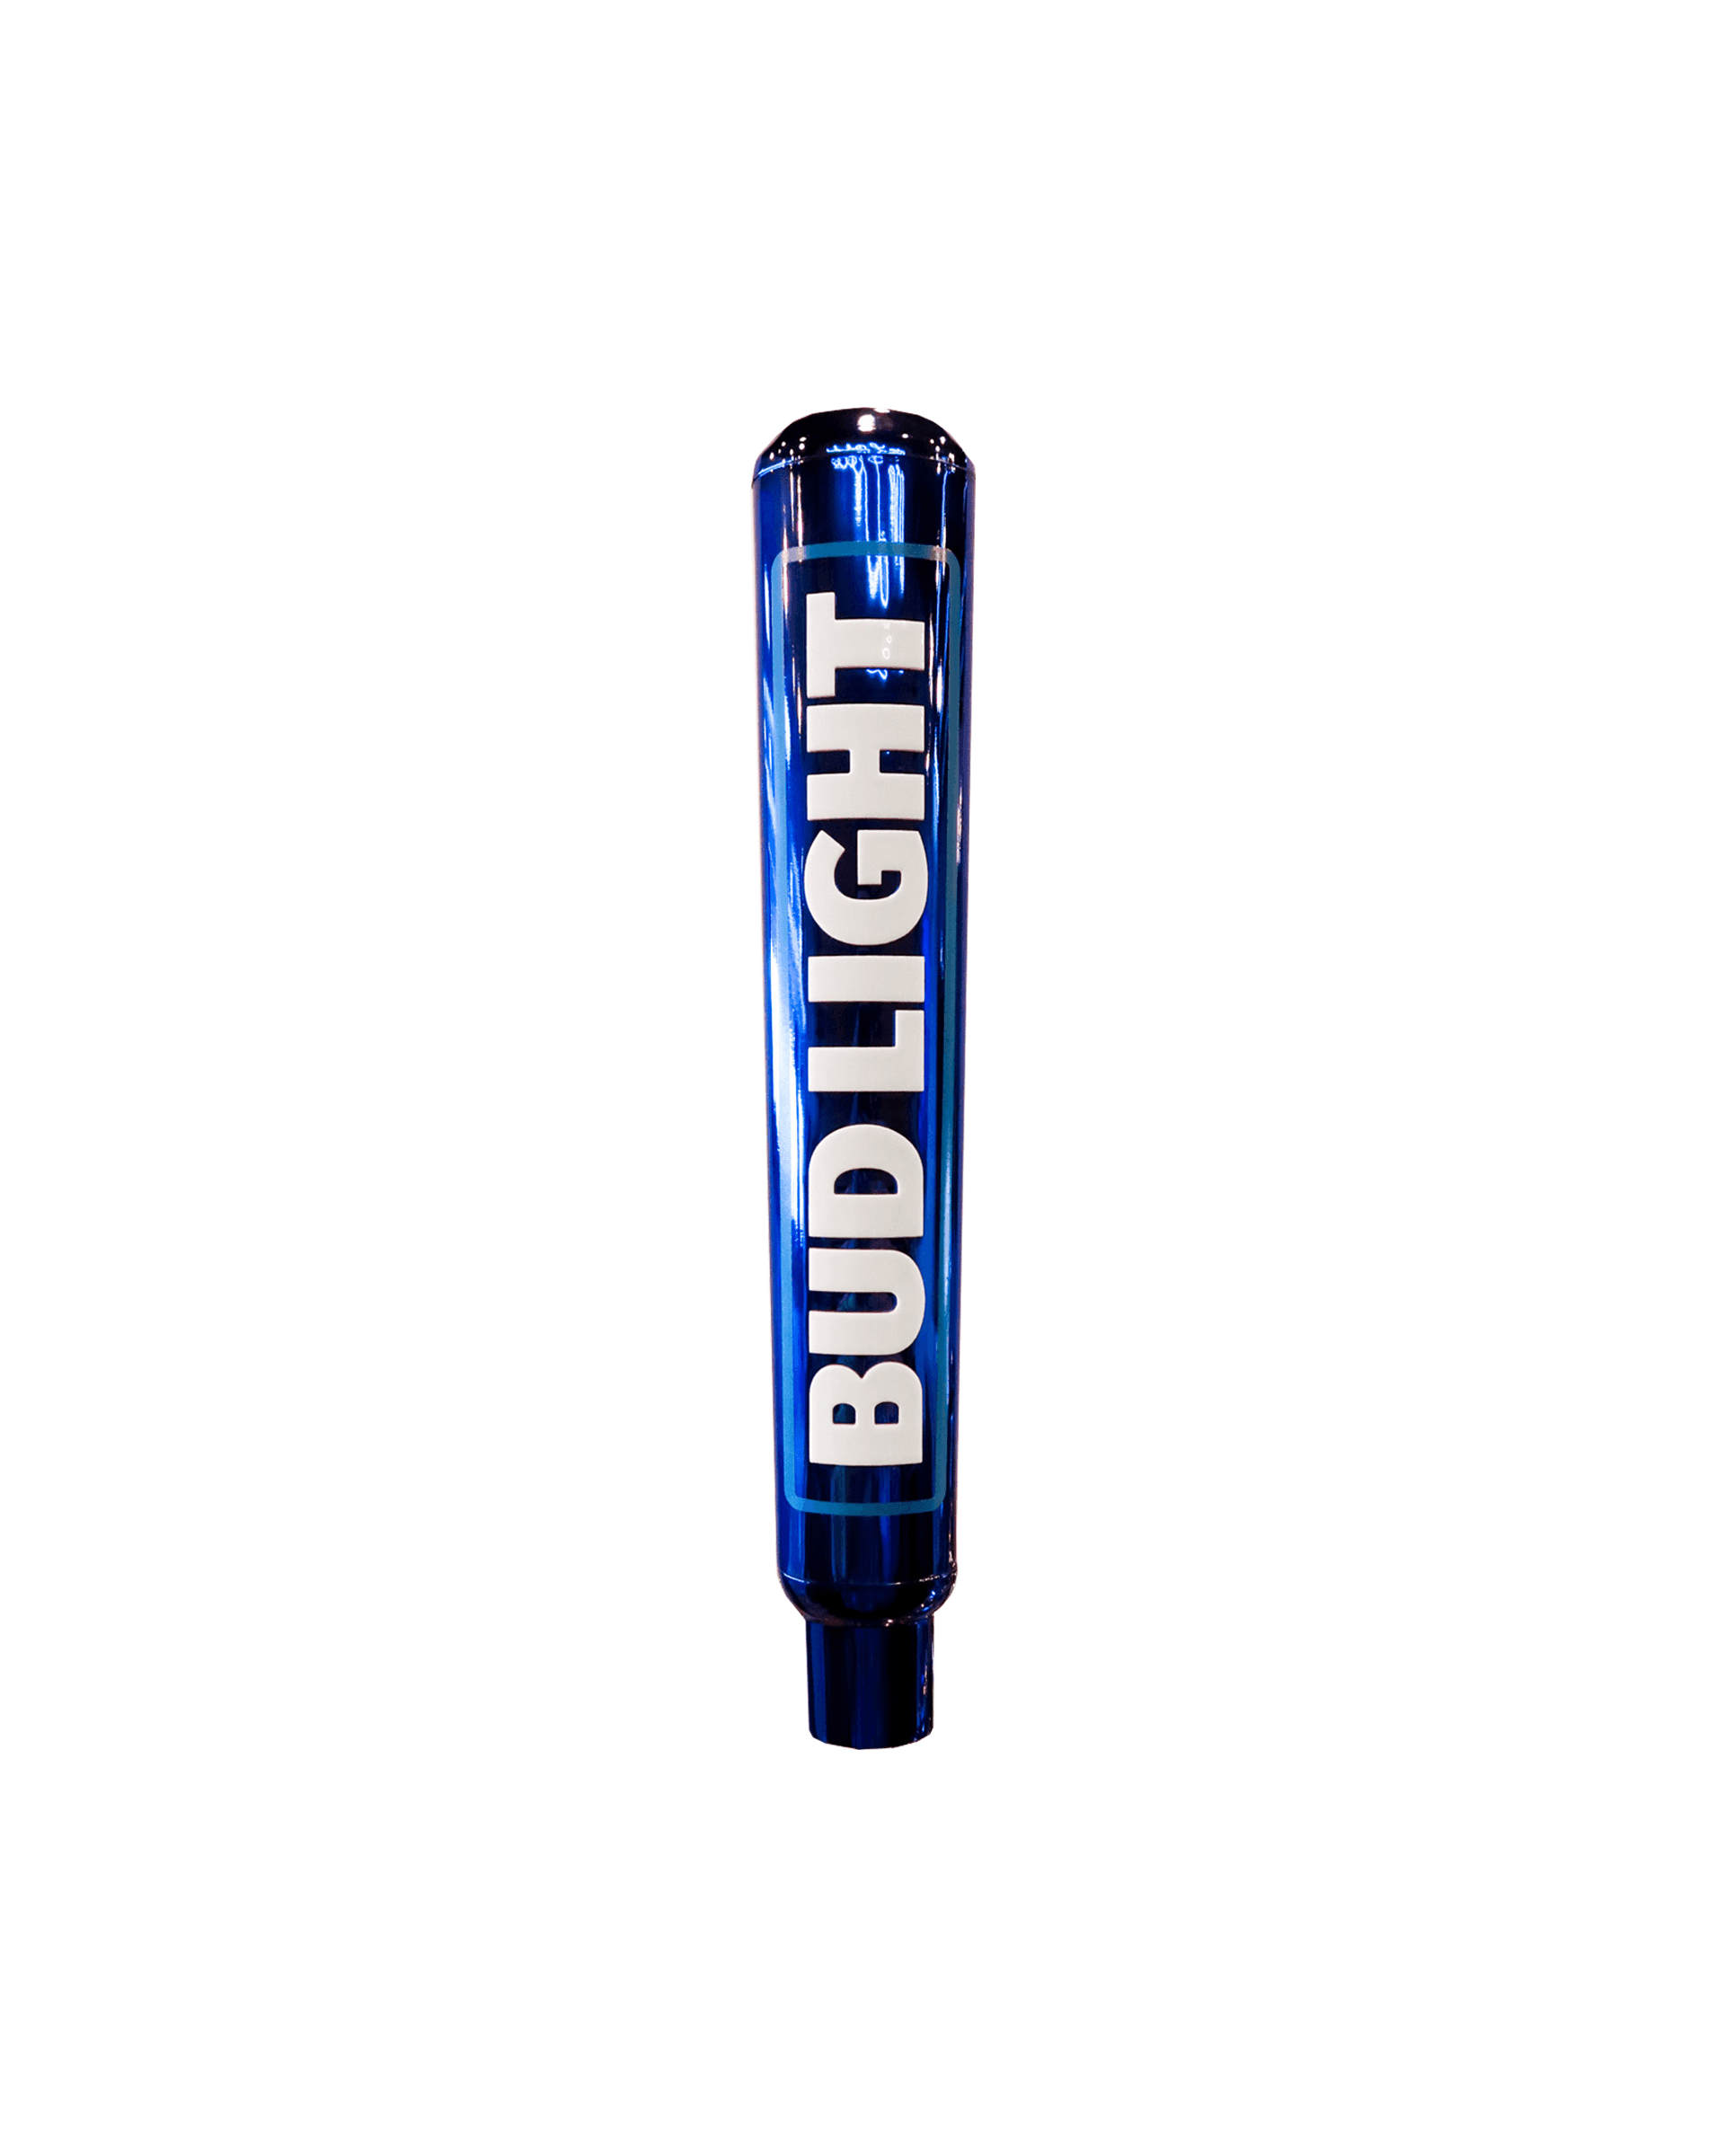 Bud Light tap handle with Bud Light horizontal logo on front of handle